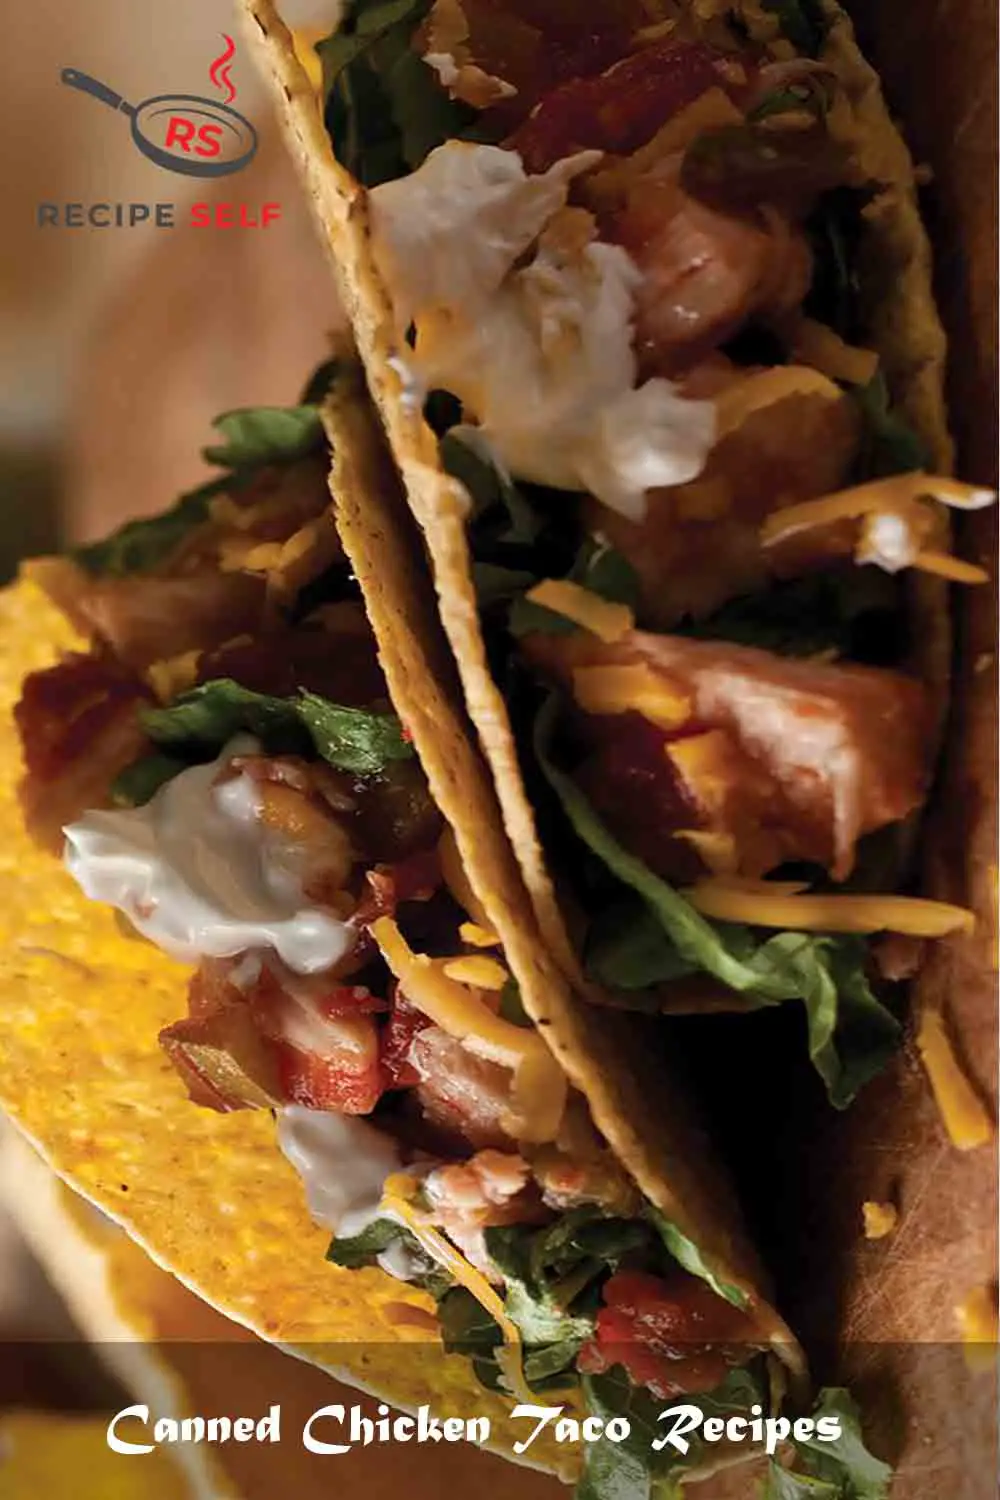 Canned Chicken Taco Recipes